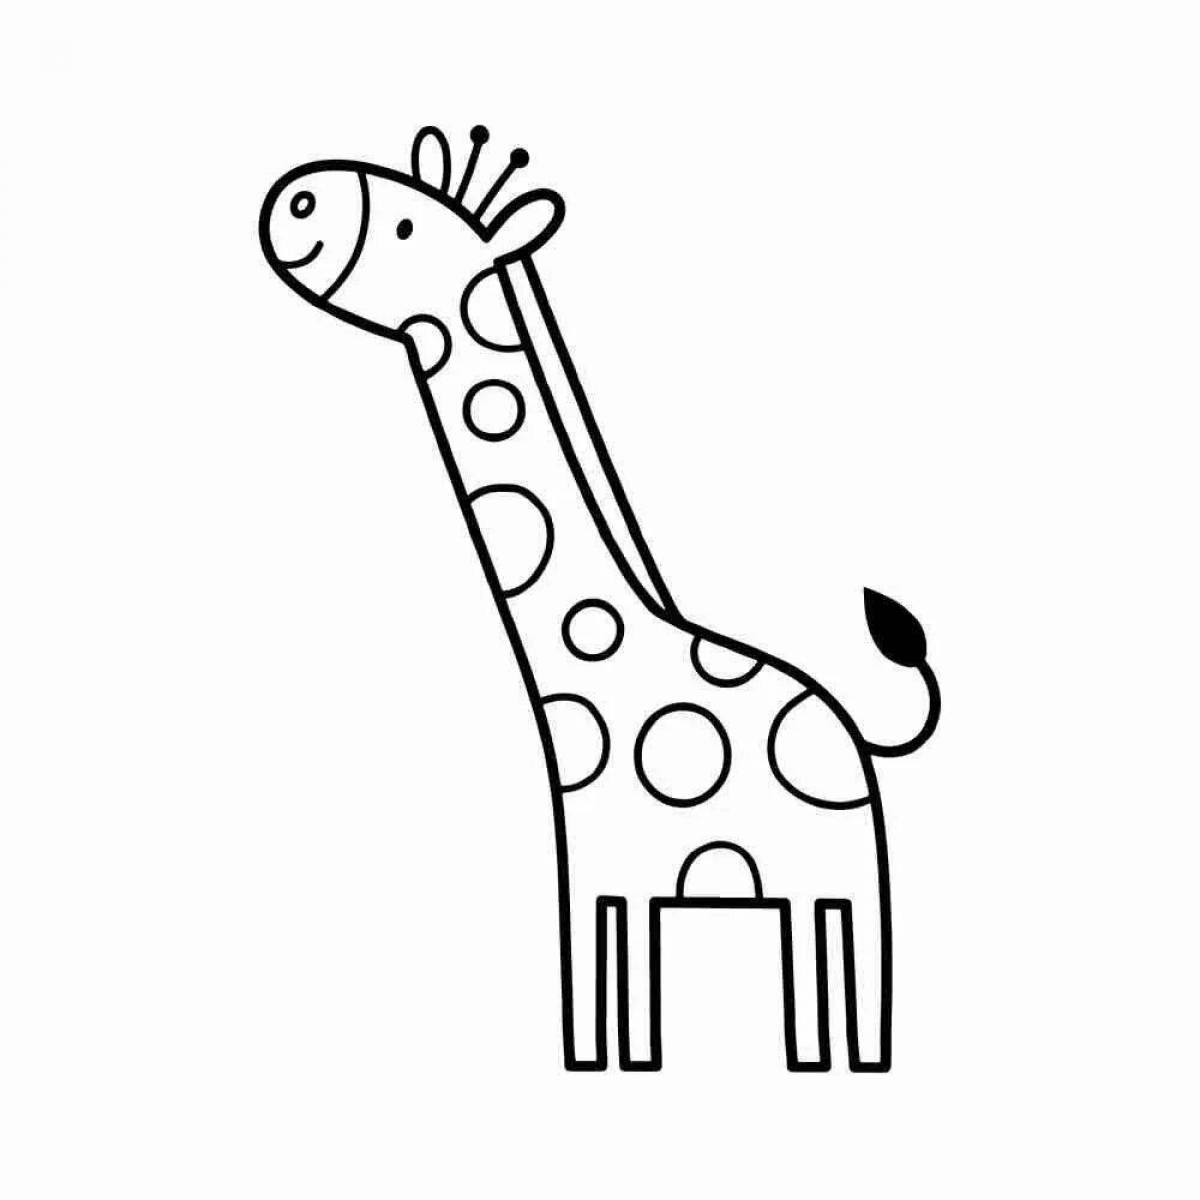 Sparkling giraffe without spots for kids